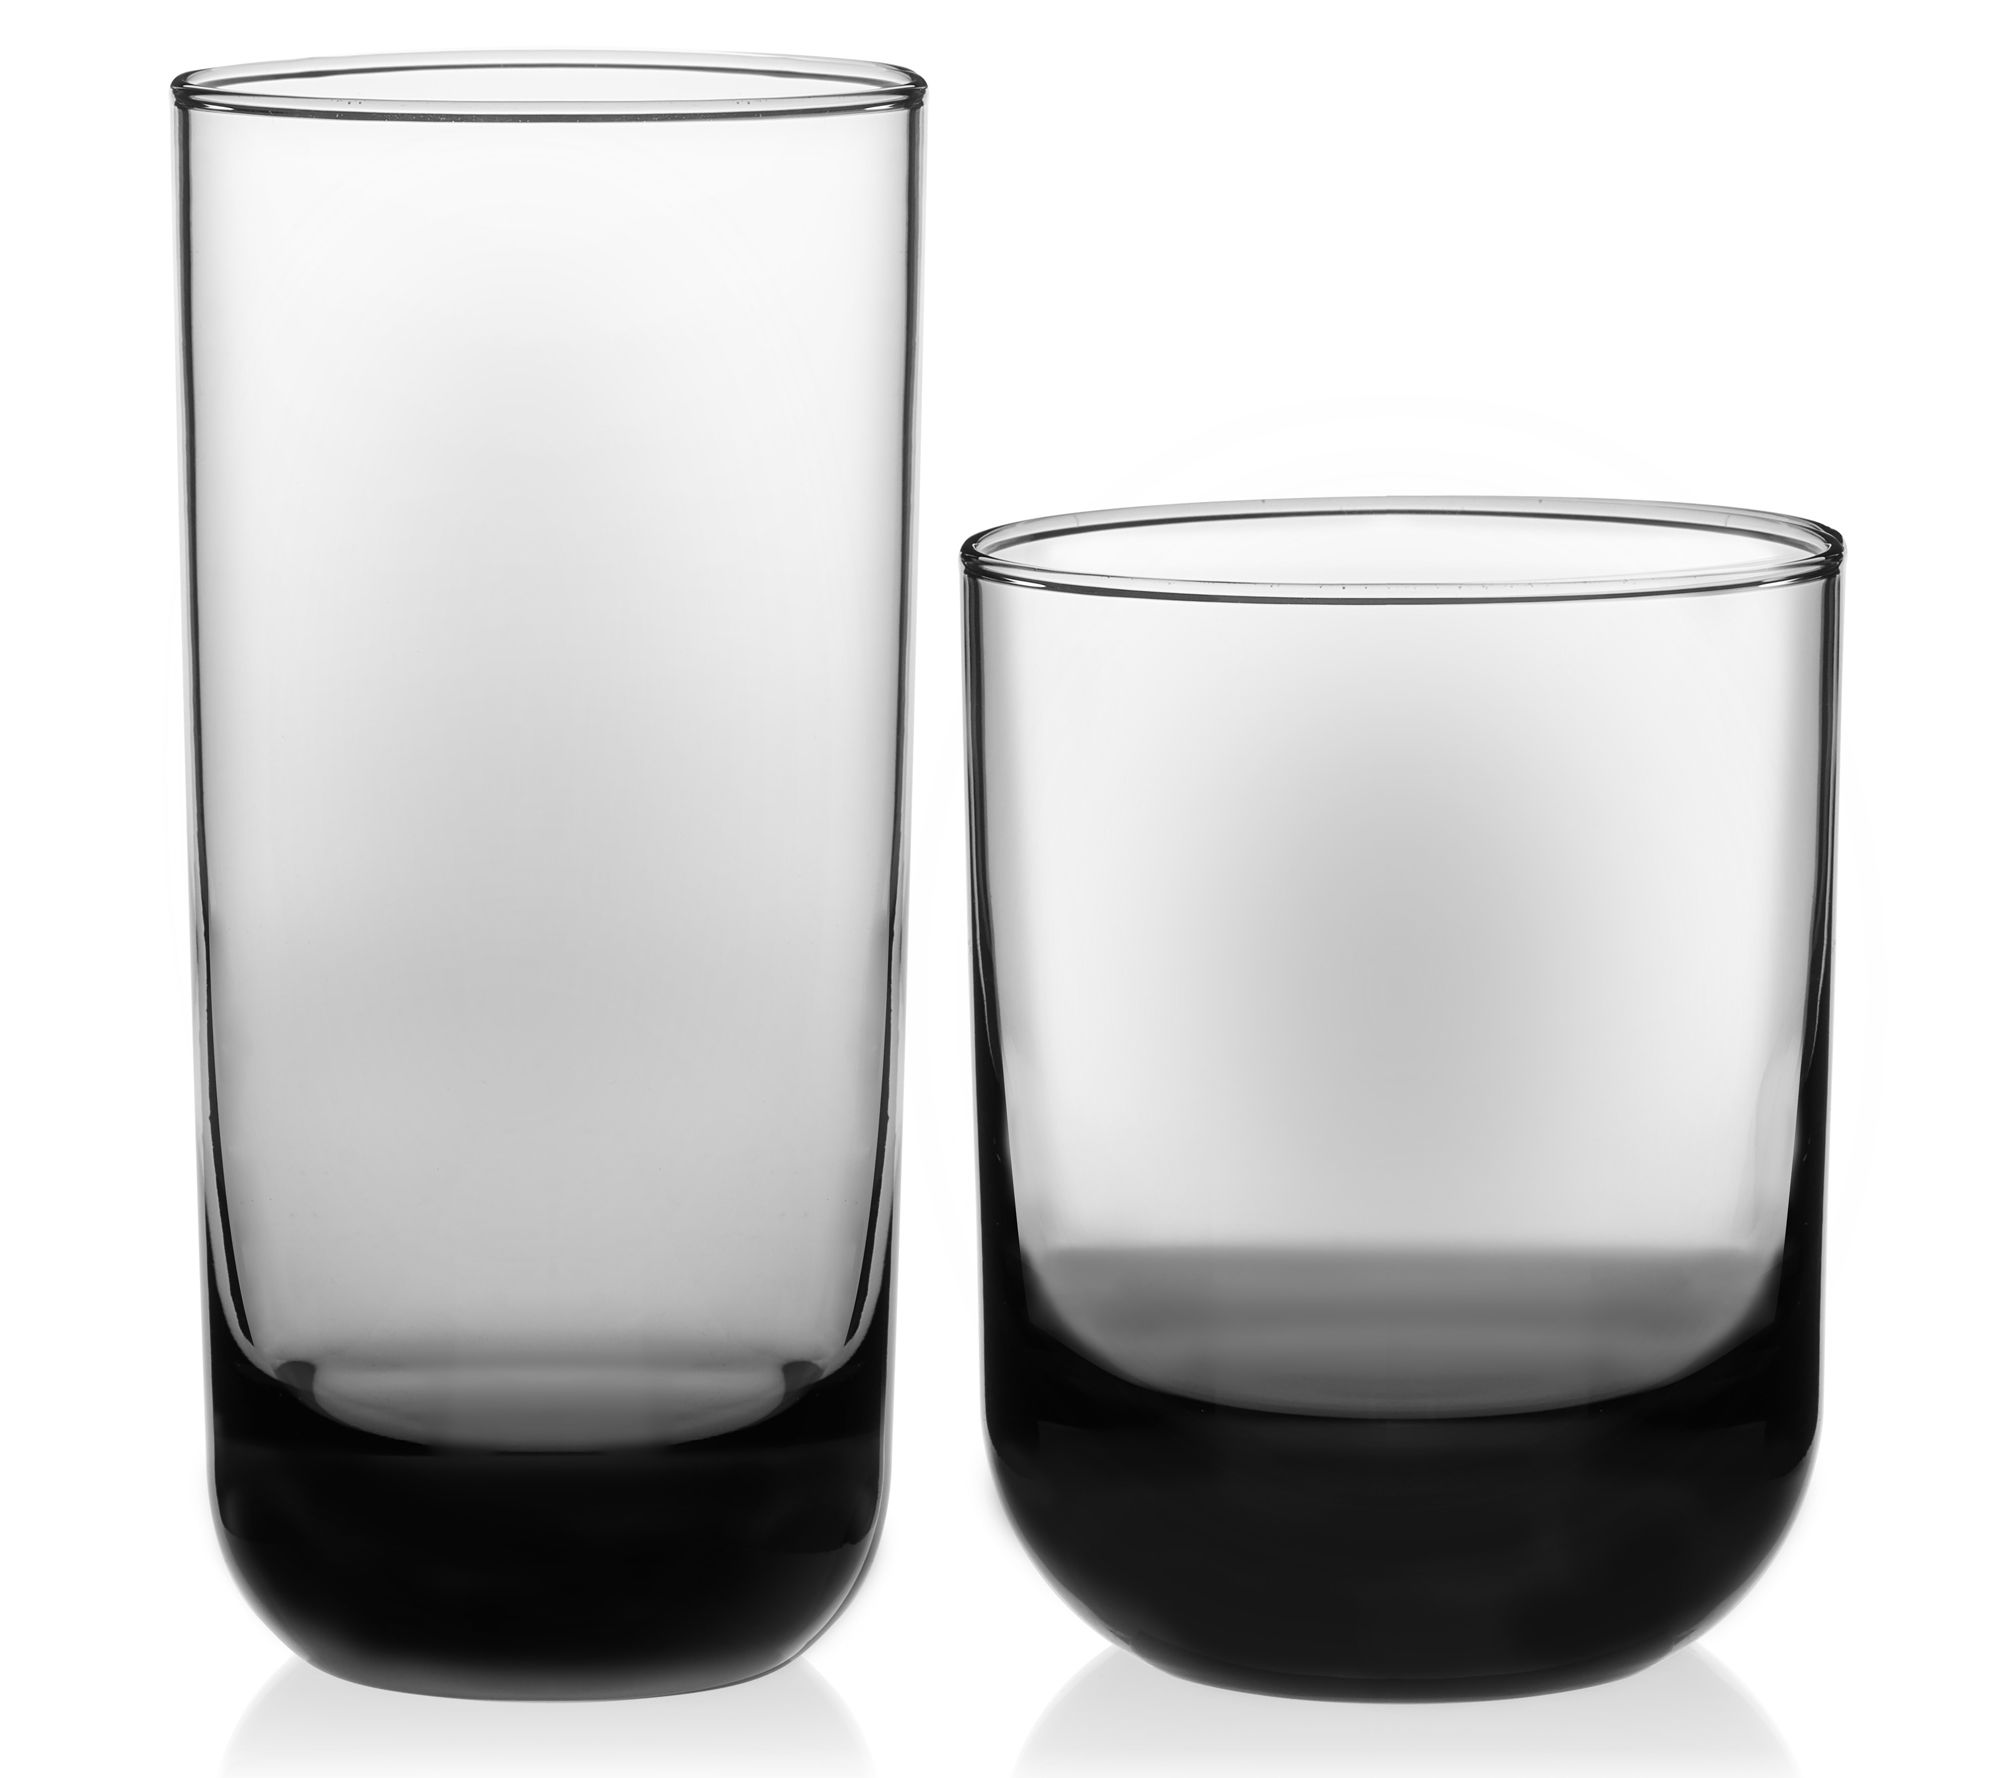 Libbey Craft Brews Nucleated Pint Beer Glasses - Set of 4